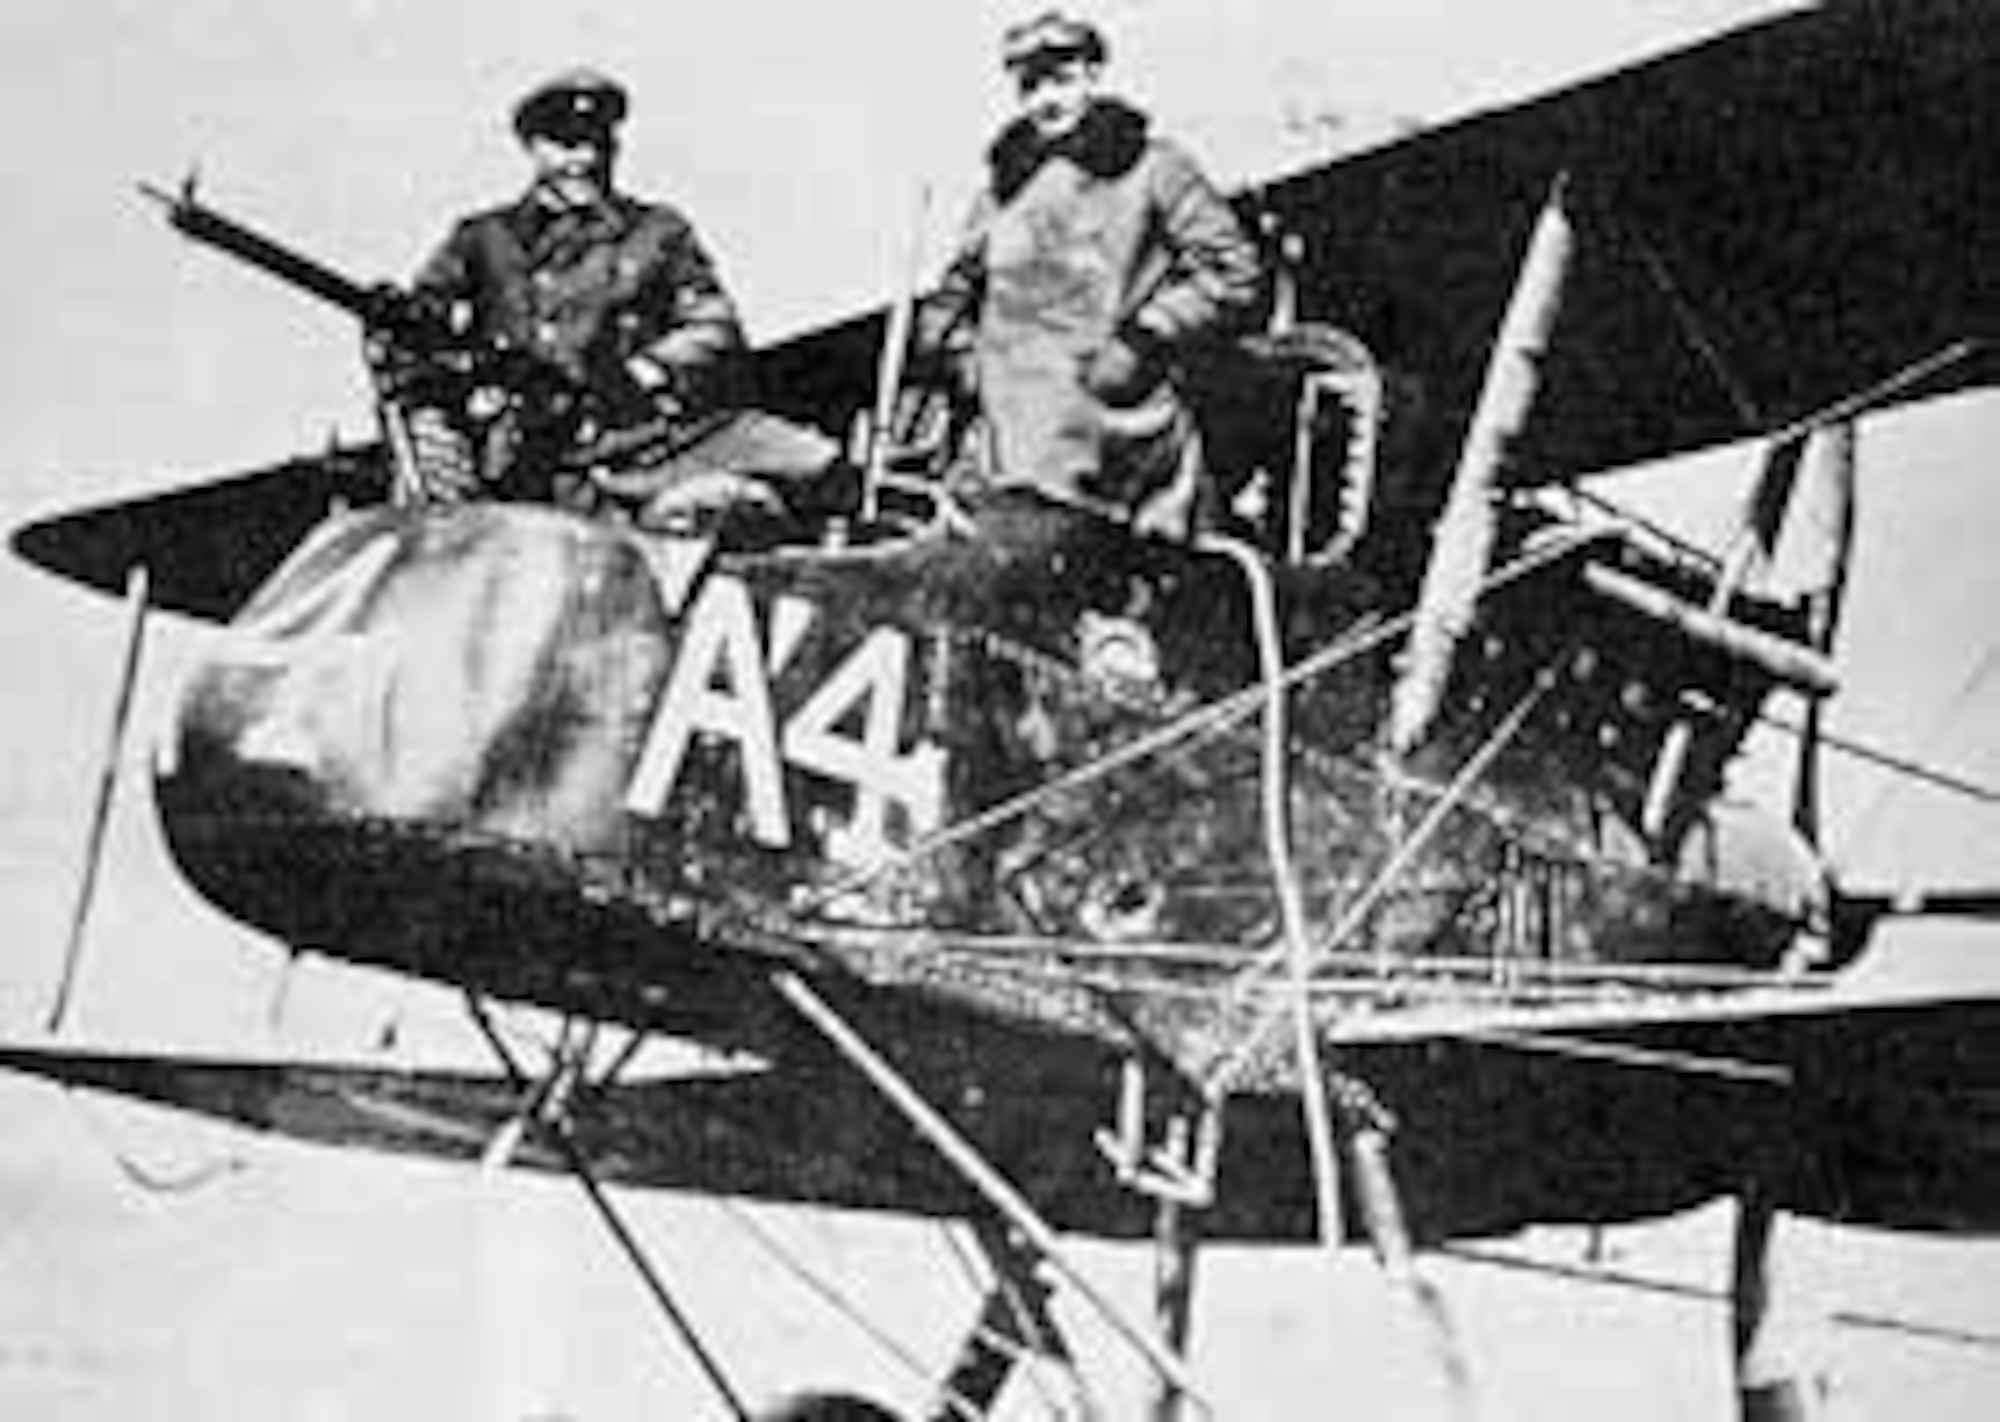 British two-seater pusher with swivel machine gun in front for use by the observer. This airplane was shot down and captured by the Germans. The victorious German pilot, Lt. Heinrich Dontermann, is standing in the rear cockpit. (U.S. Air Force photo)